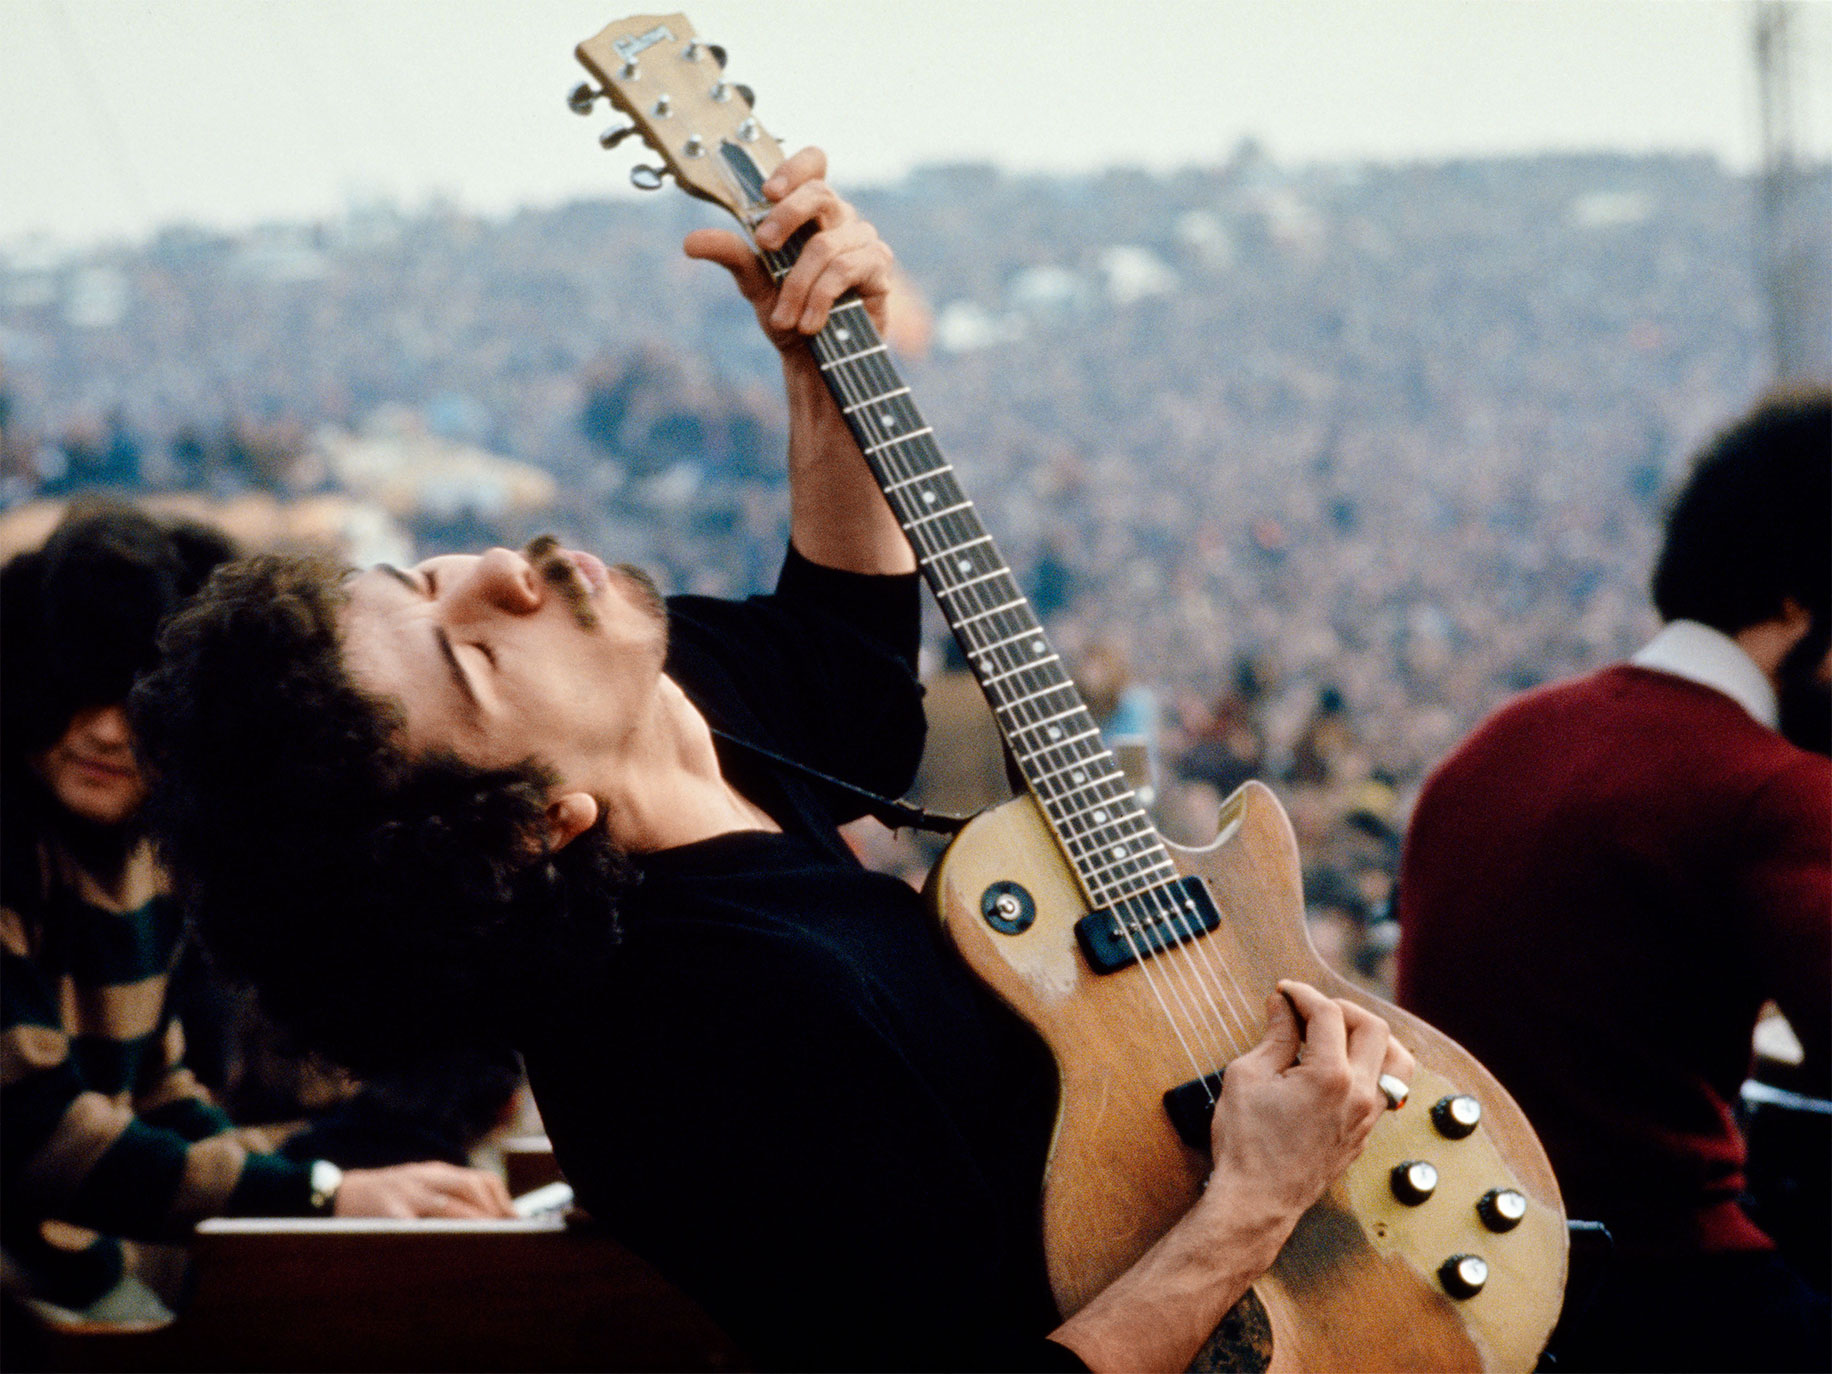 Carlos Santana performing at the Altamont Free Festival, Altamont Speedway, California, 1969.